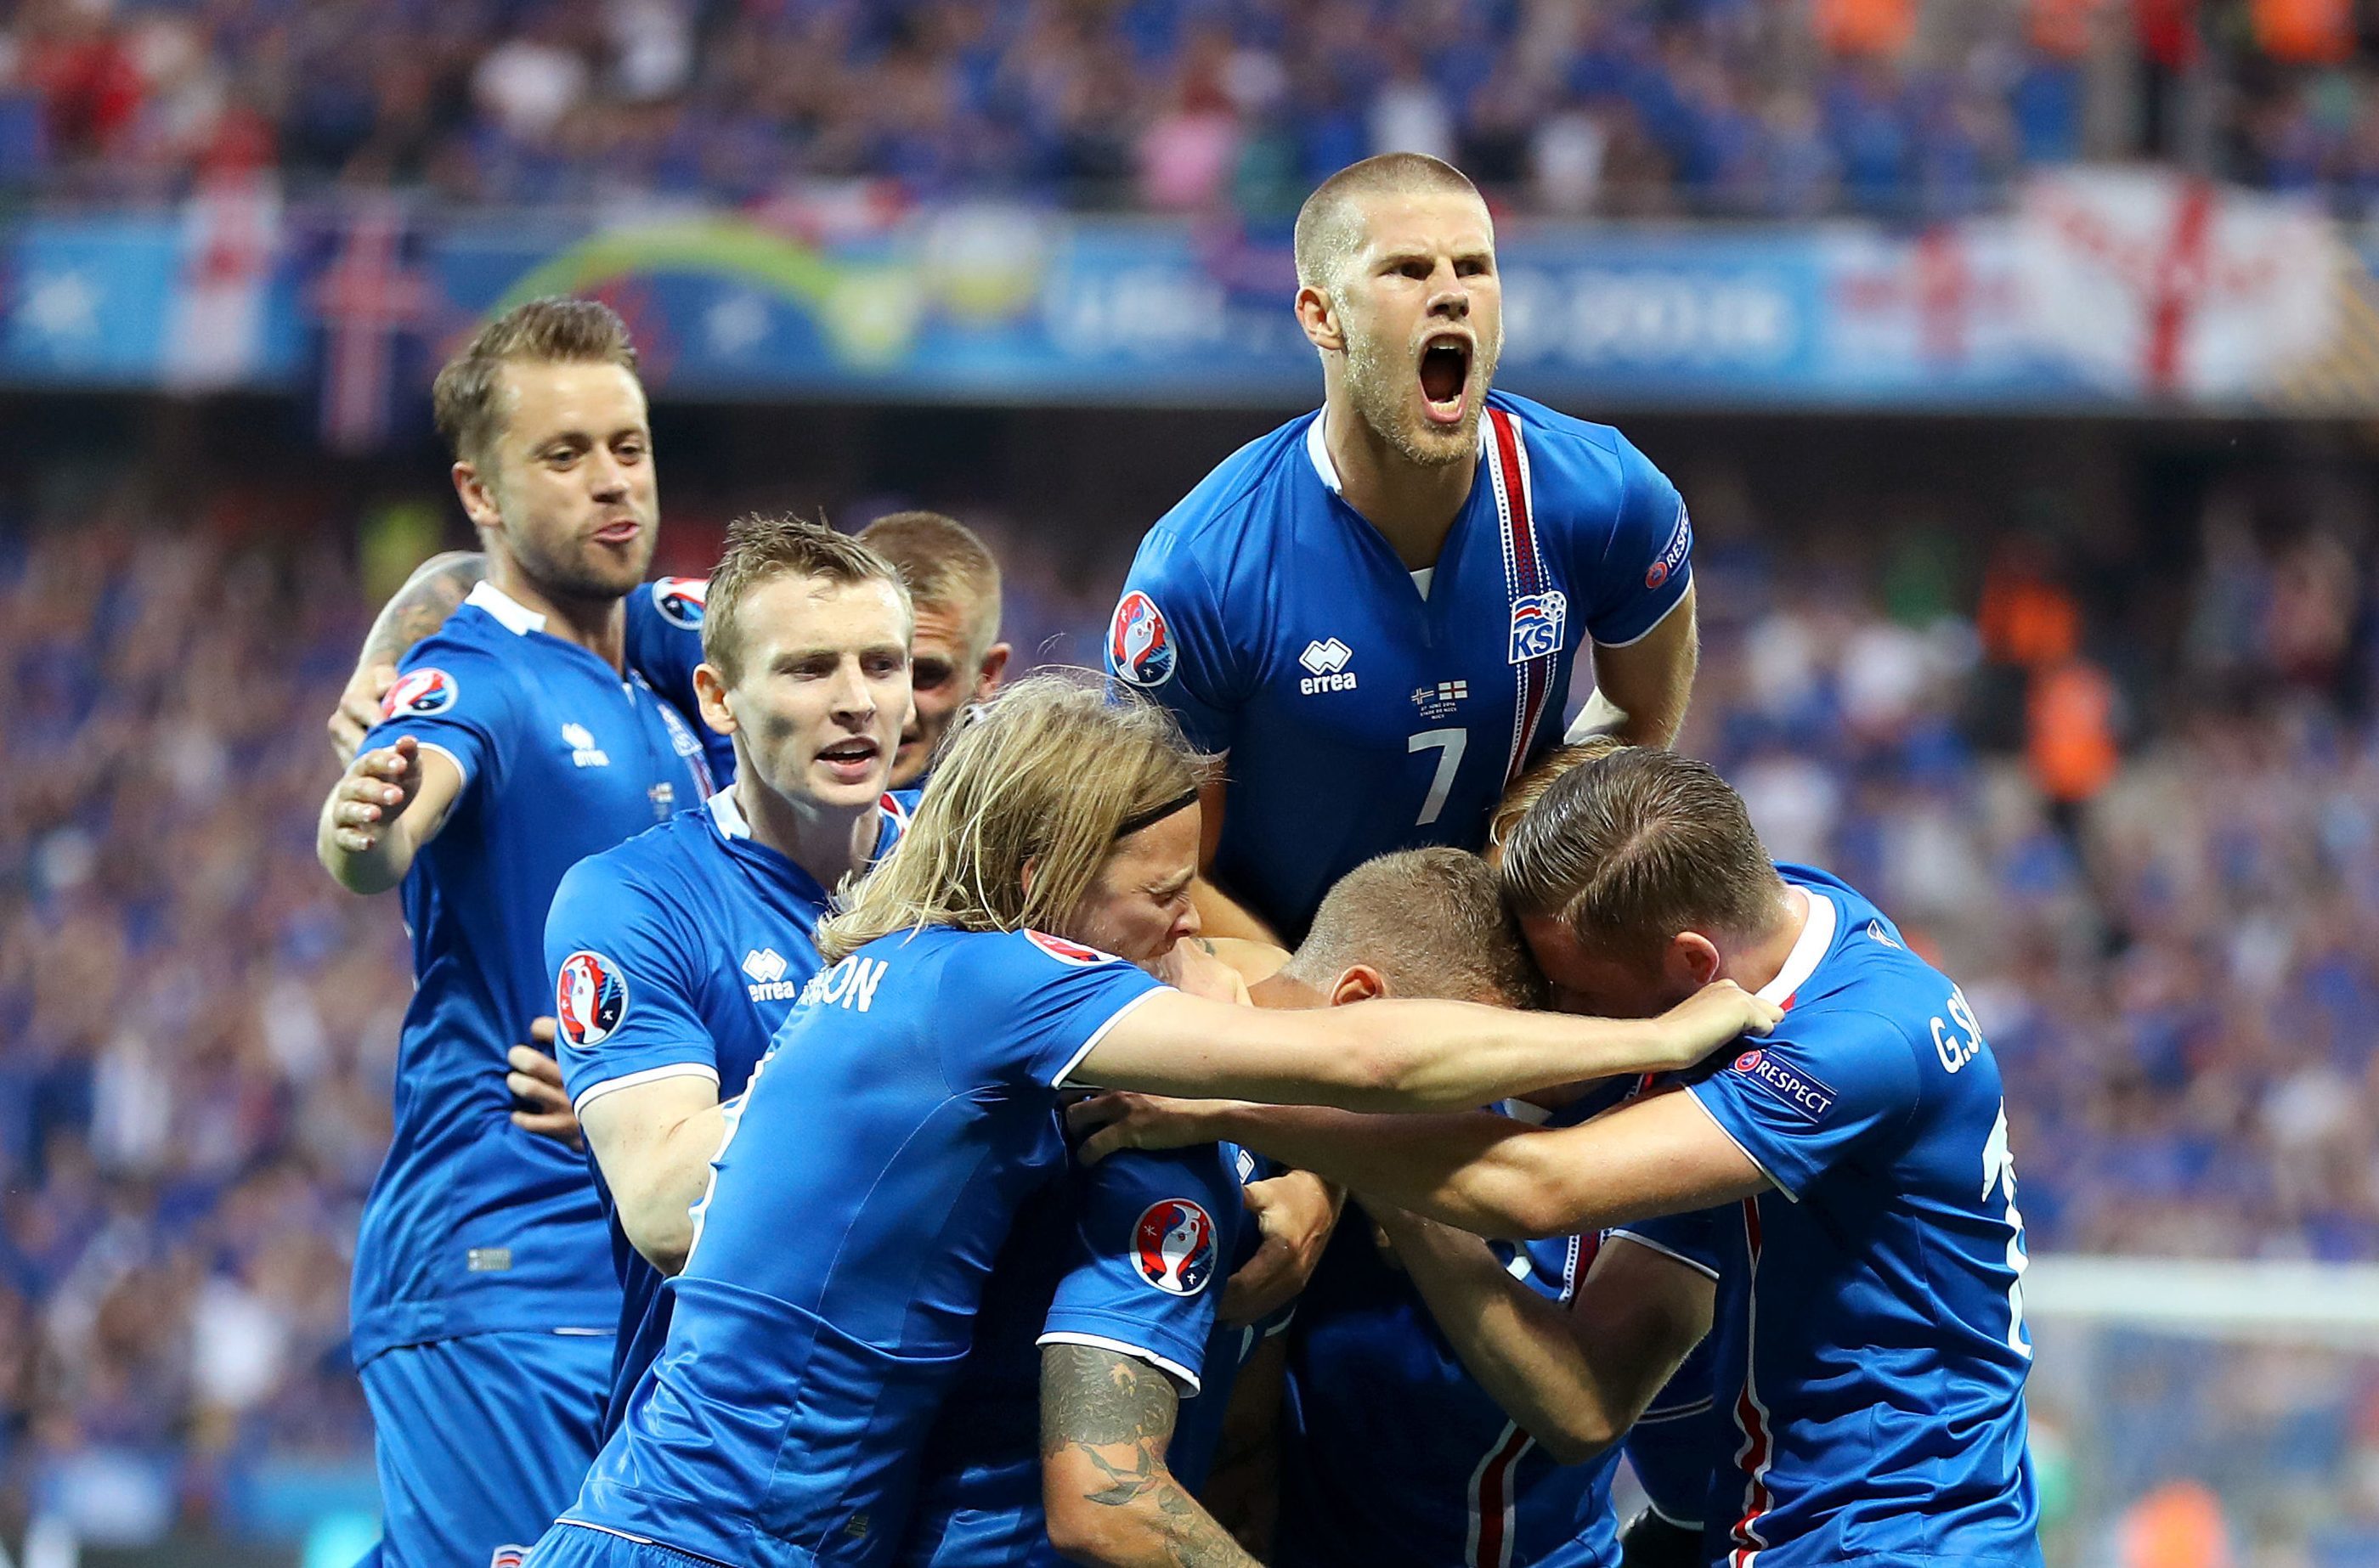 Iceland haven't done too badly as a football nation recently.